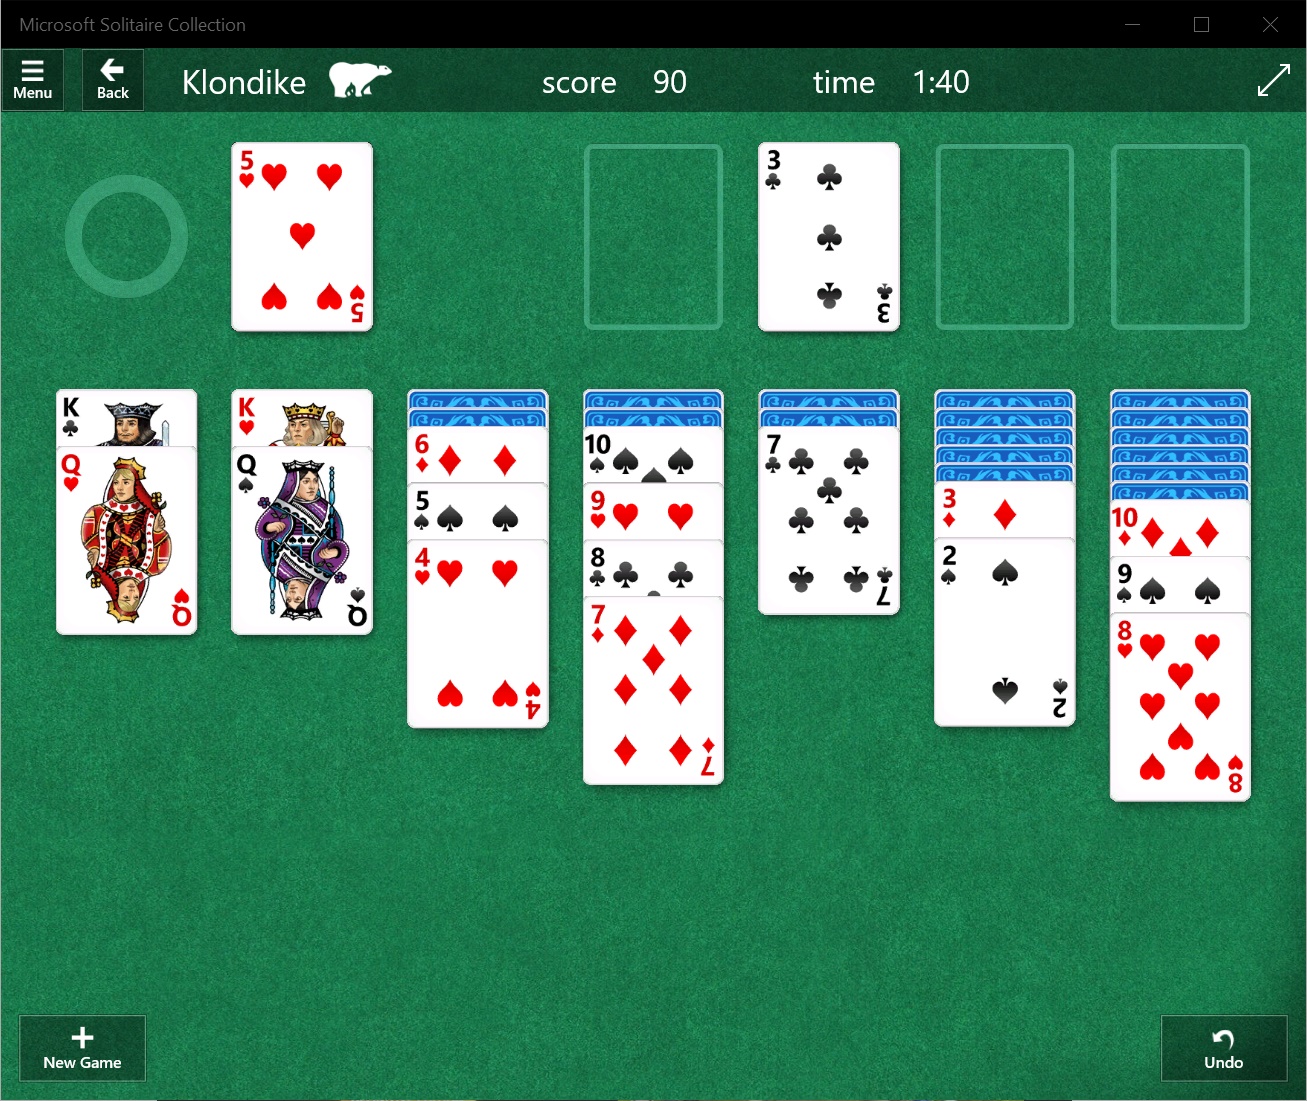 windows 10 microsoft solitaire collection